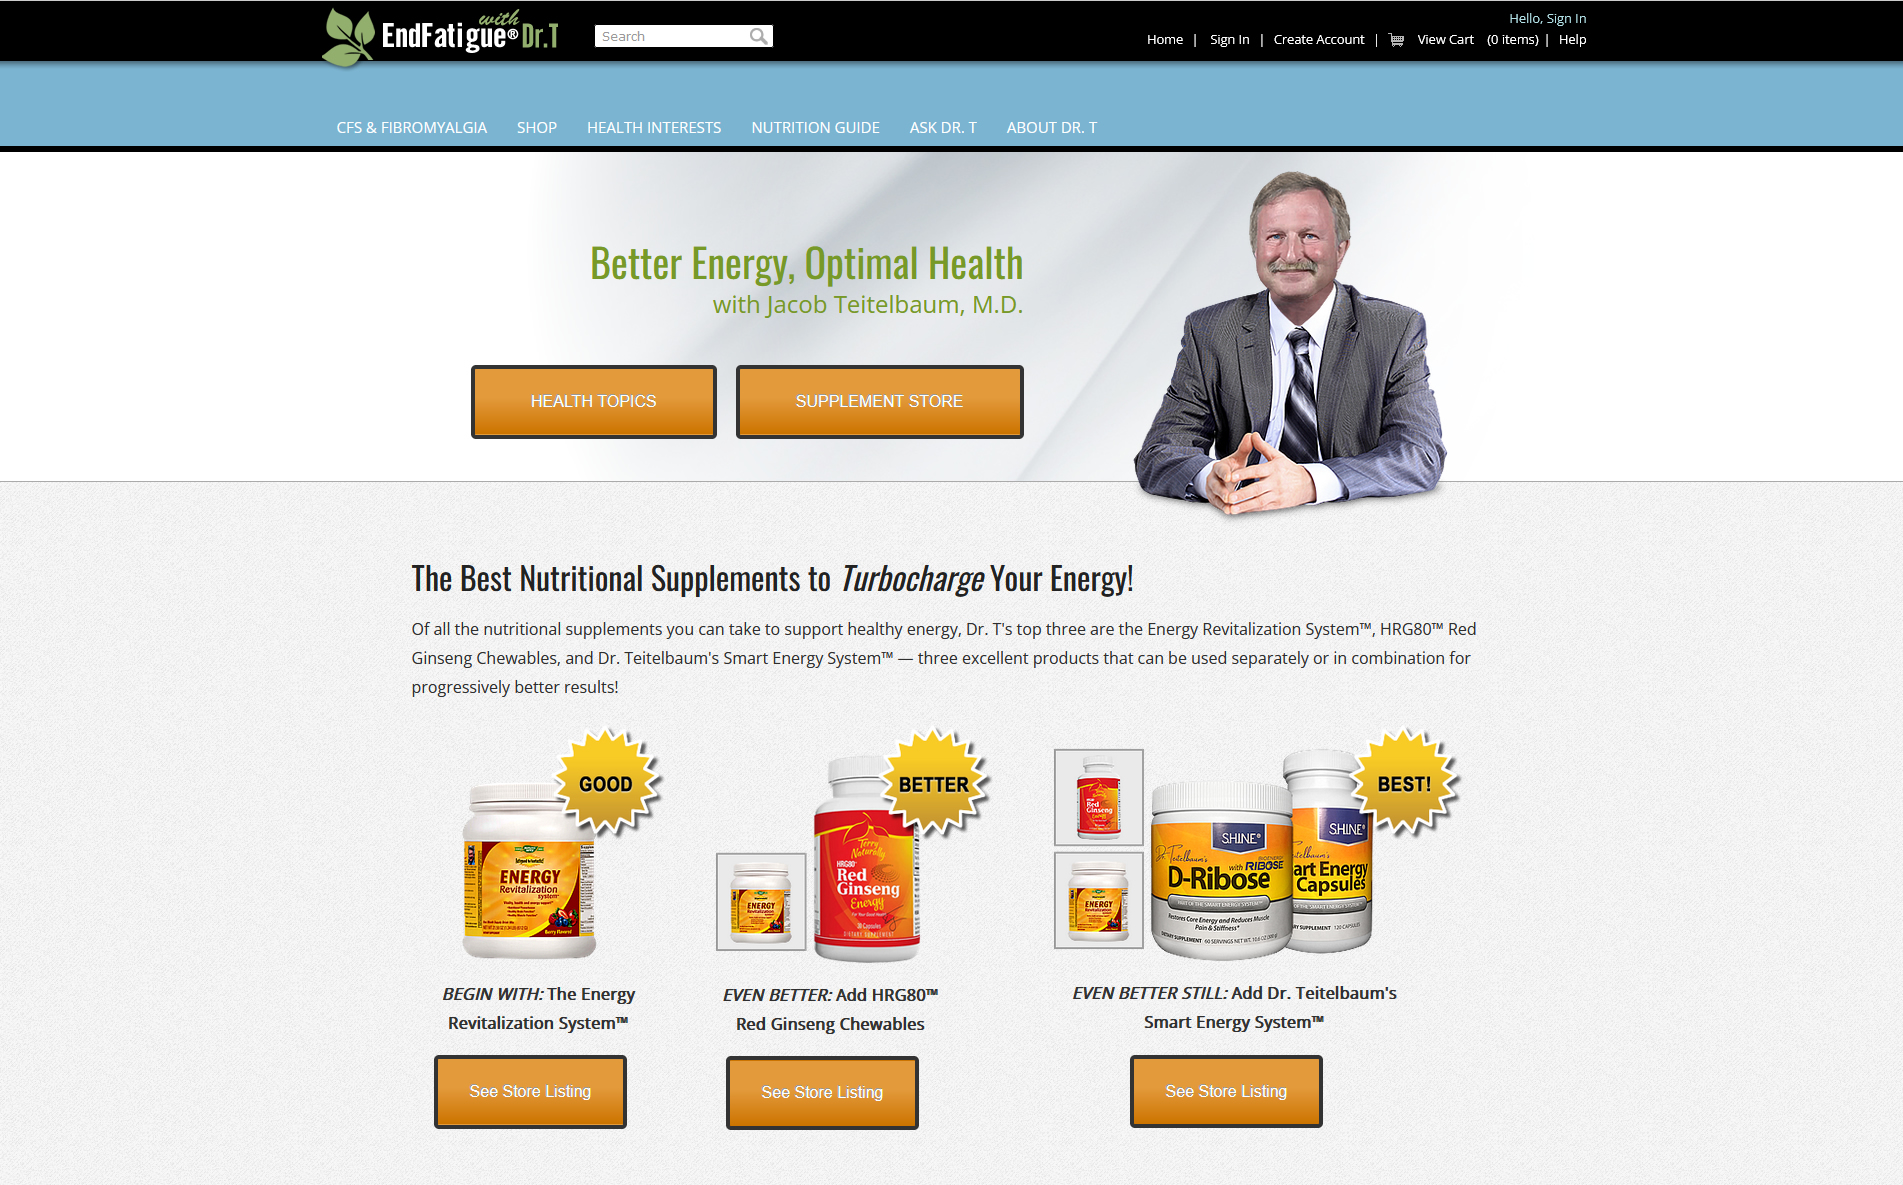 End Fatigue Supplement Store